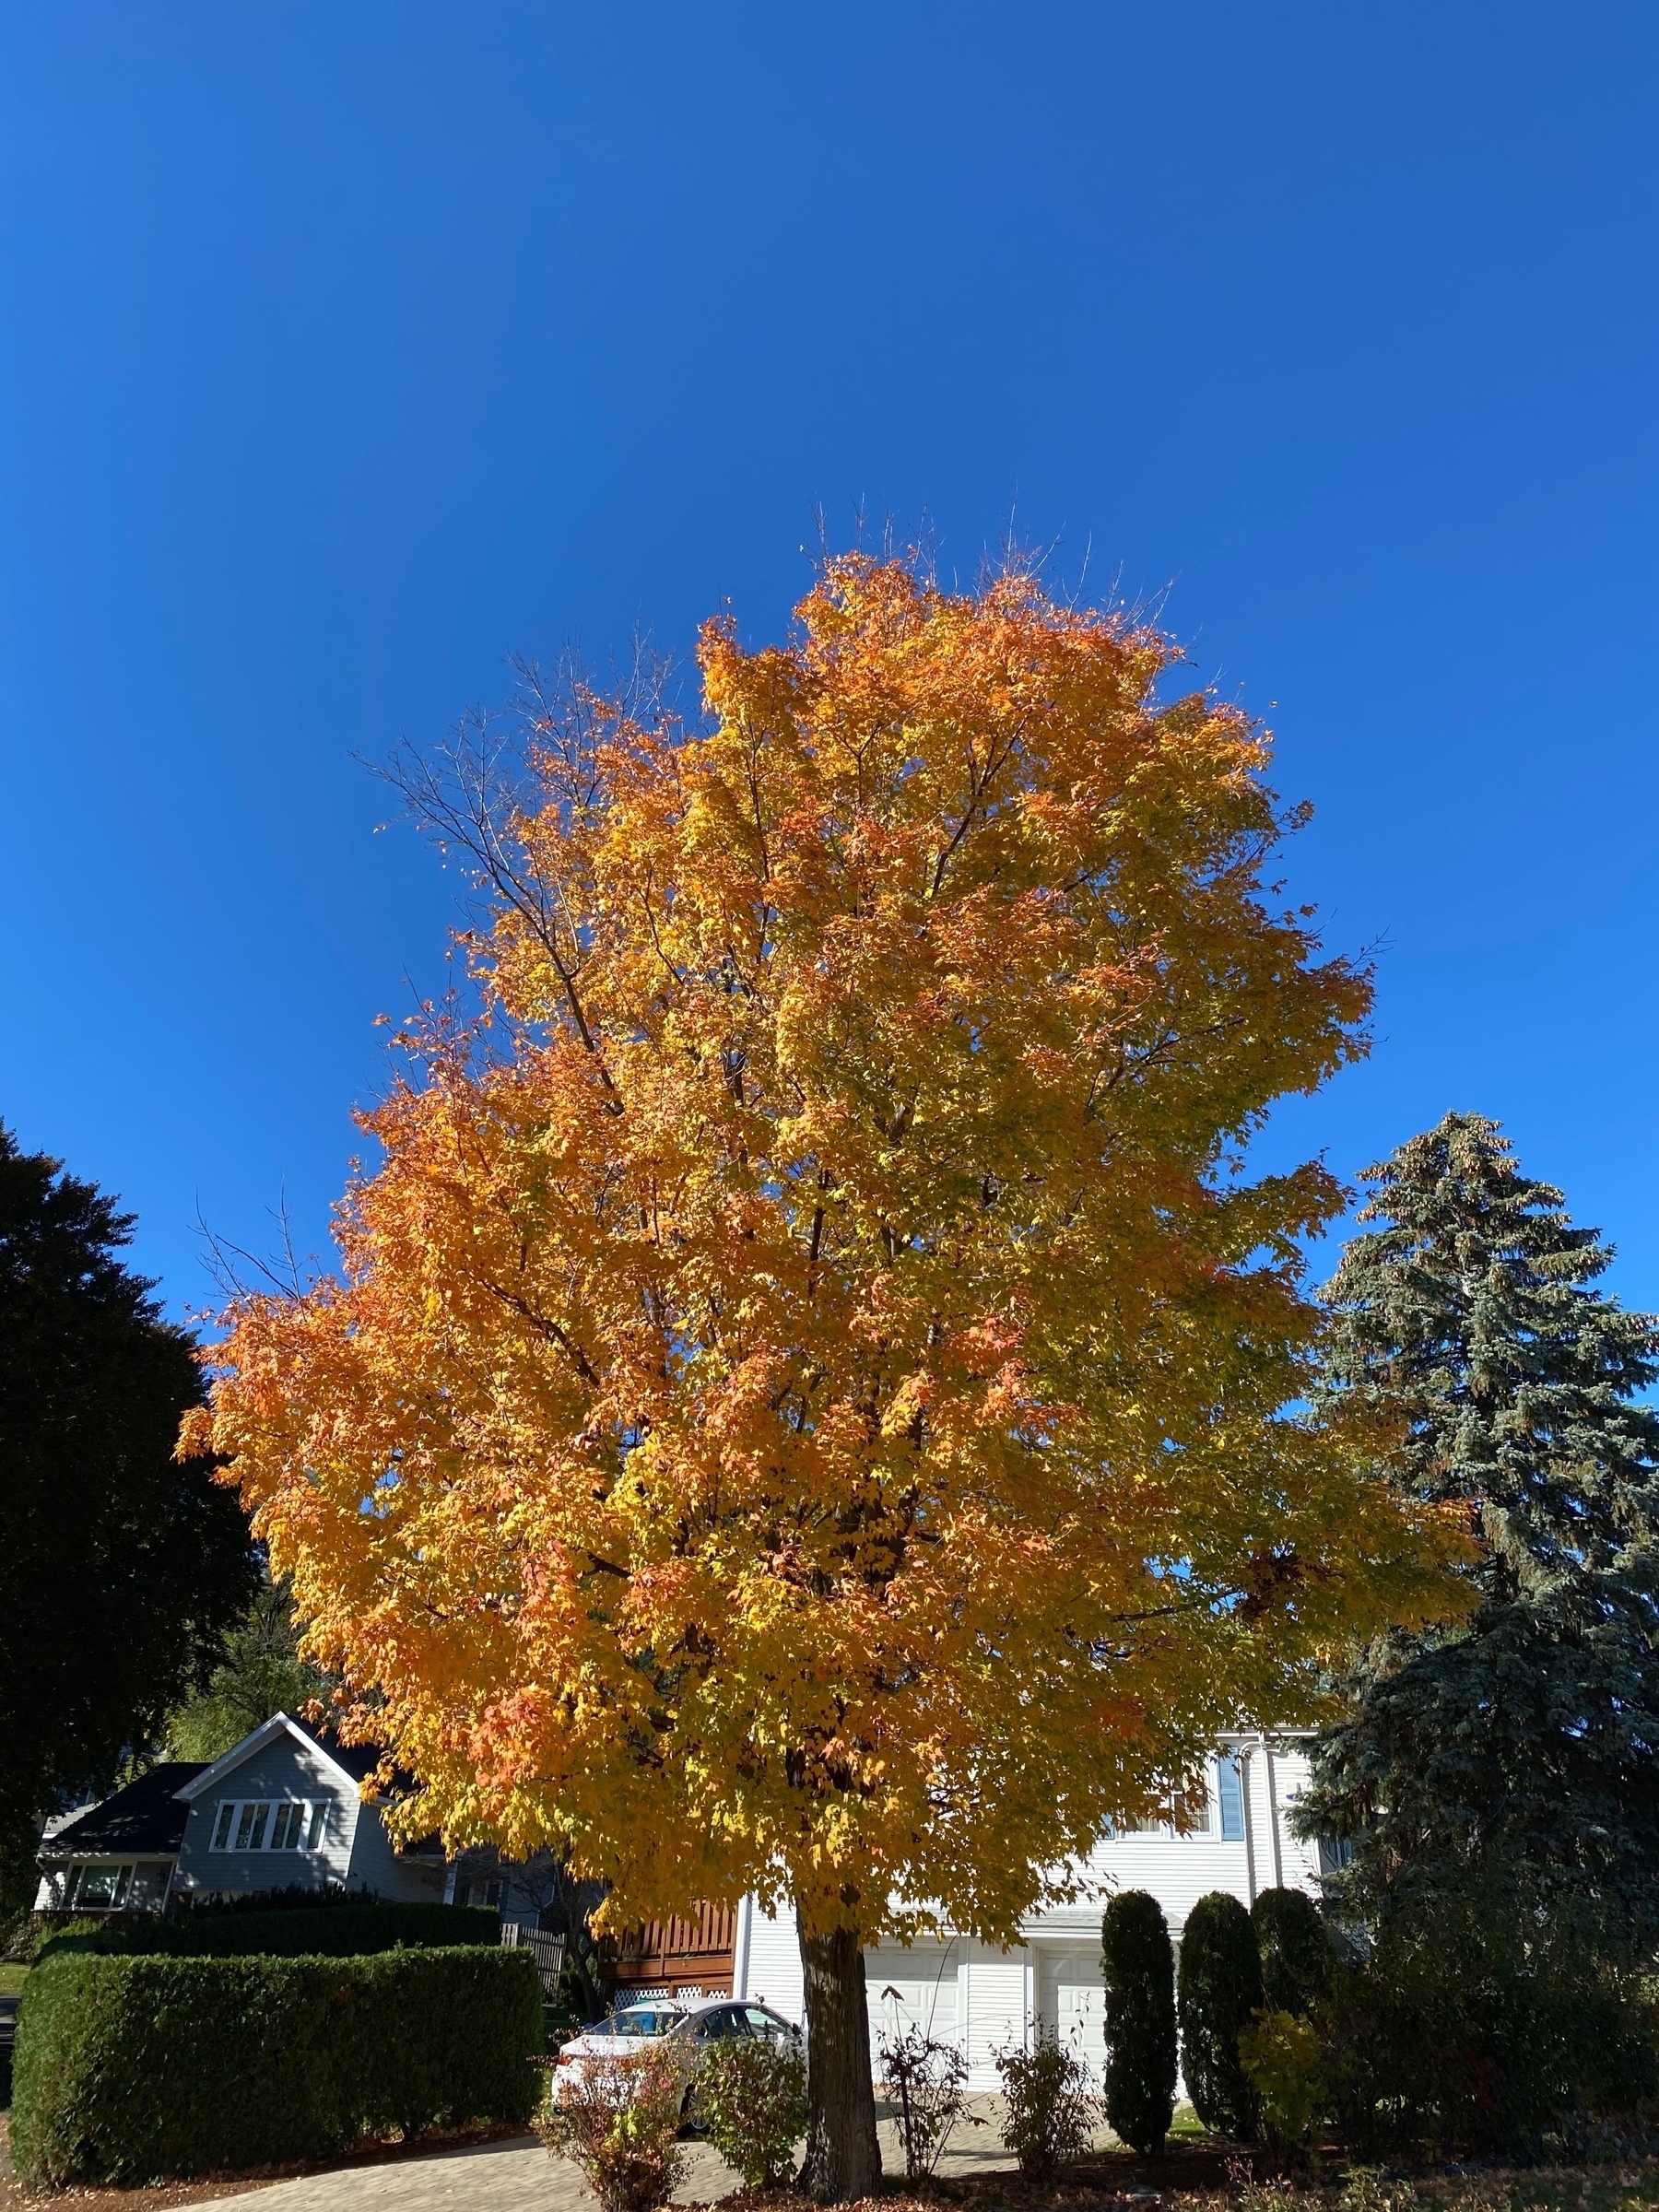 A tree with bright yellow and orange fall foliage in front of a white house, a very blue sky above.